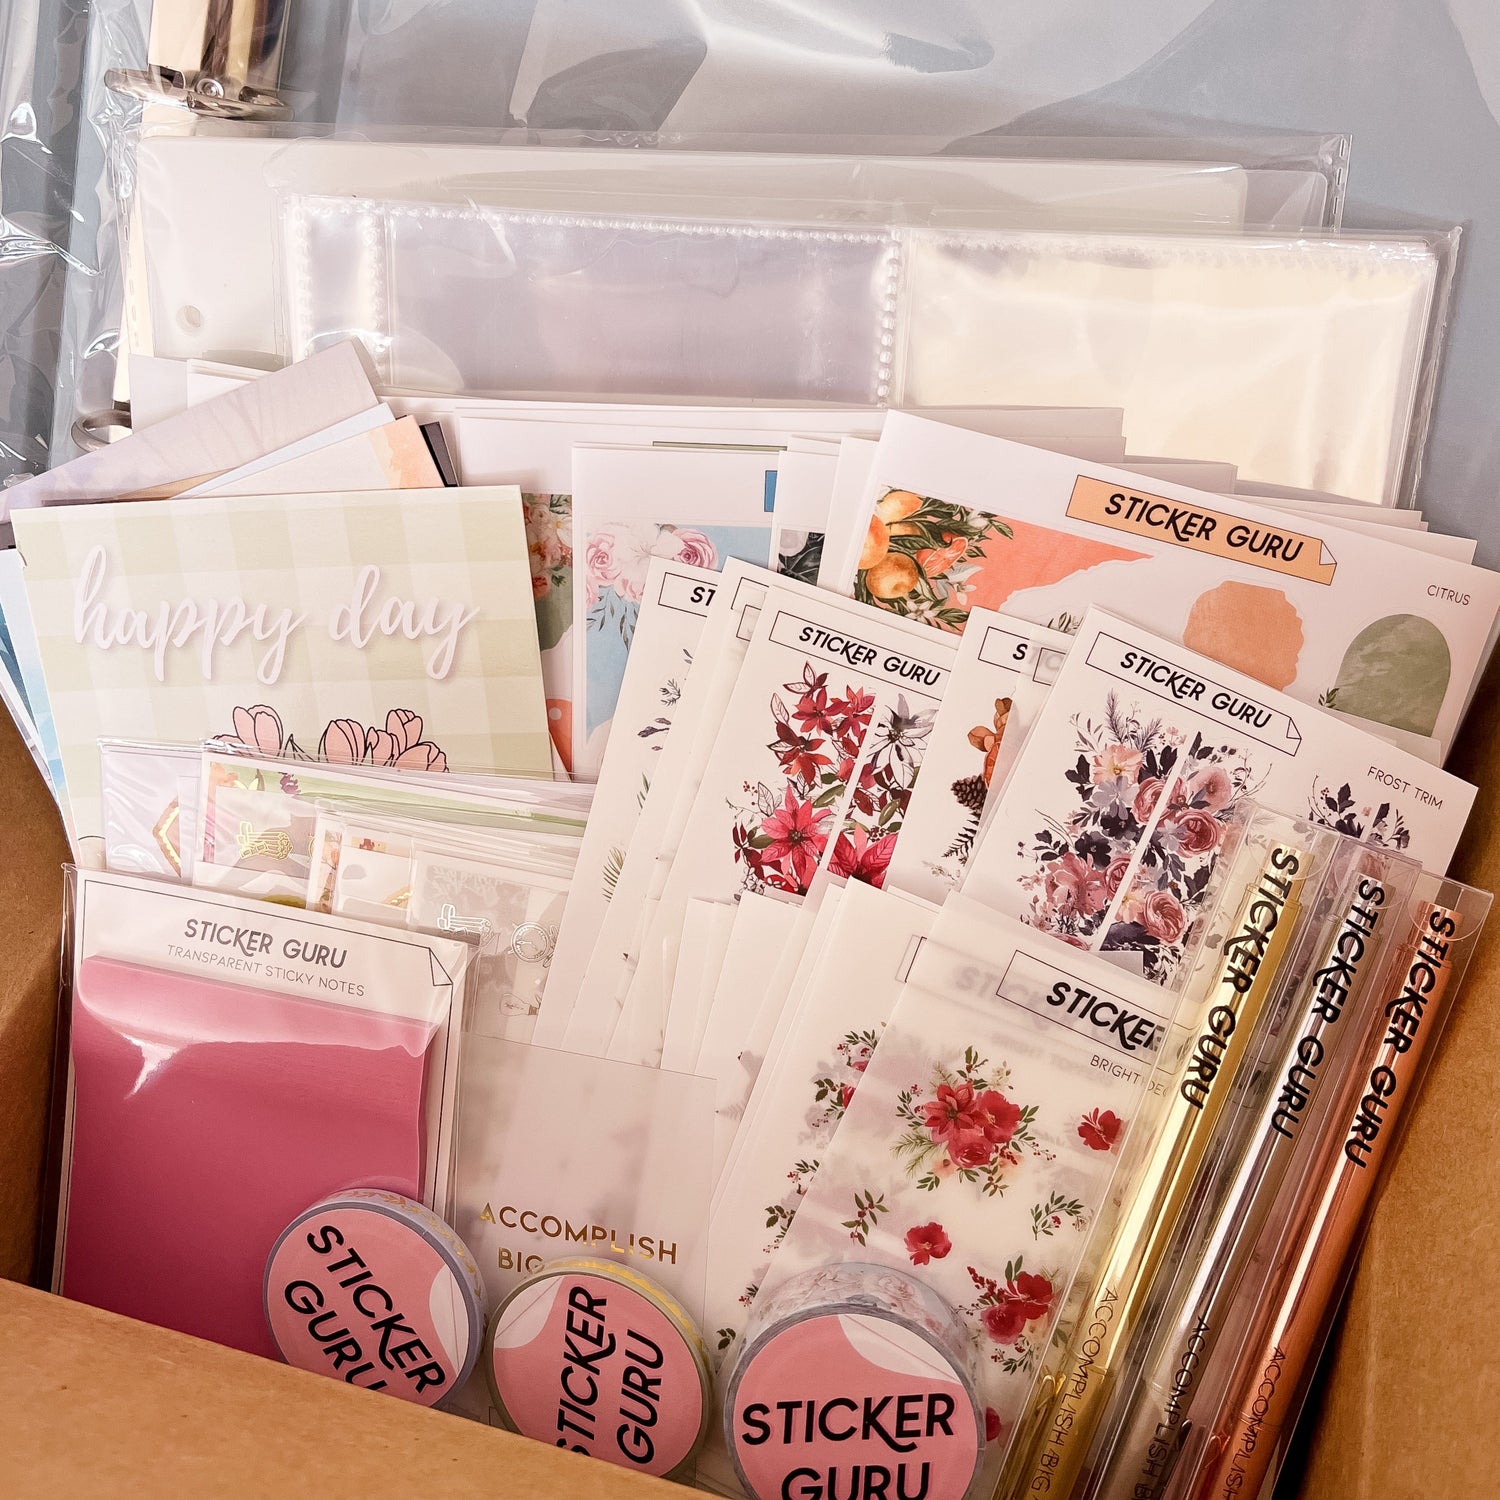 Oops Sticker Overstock! – The Manna Box